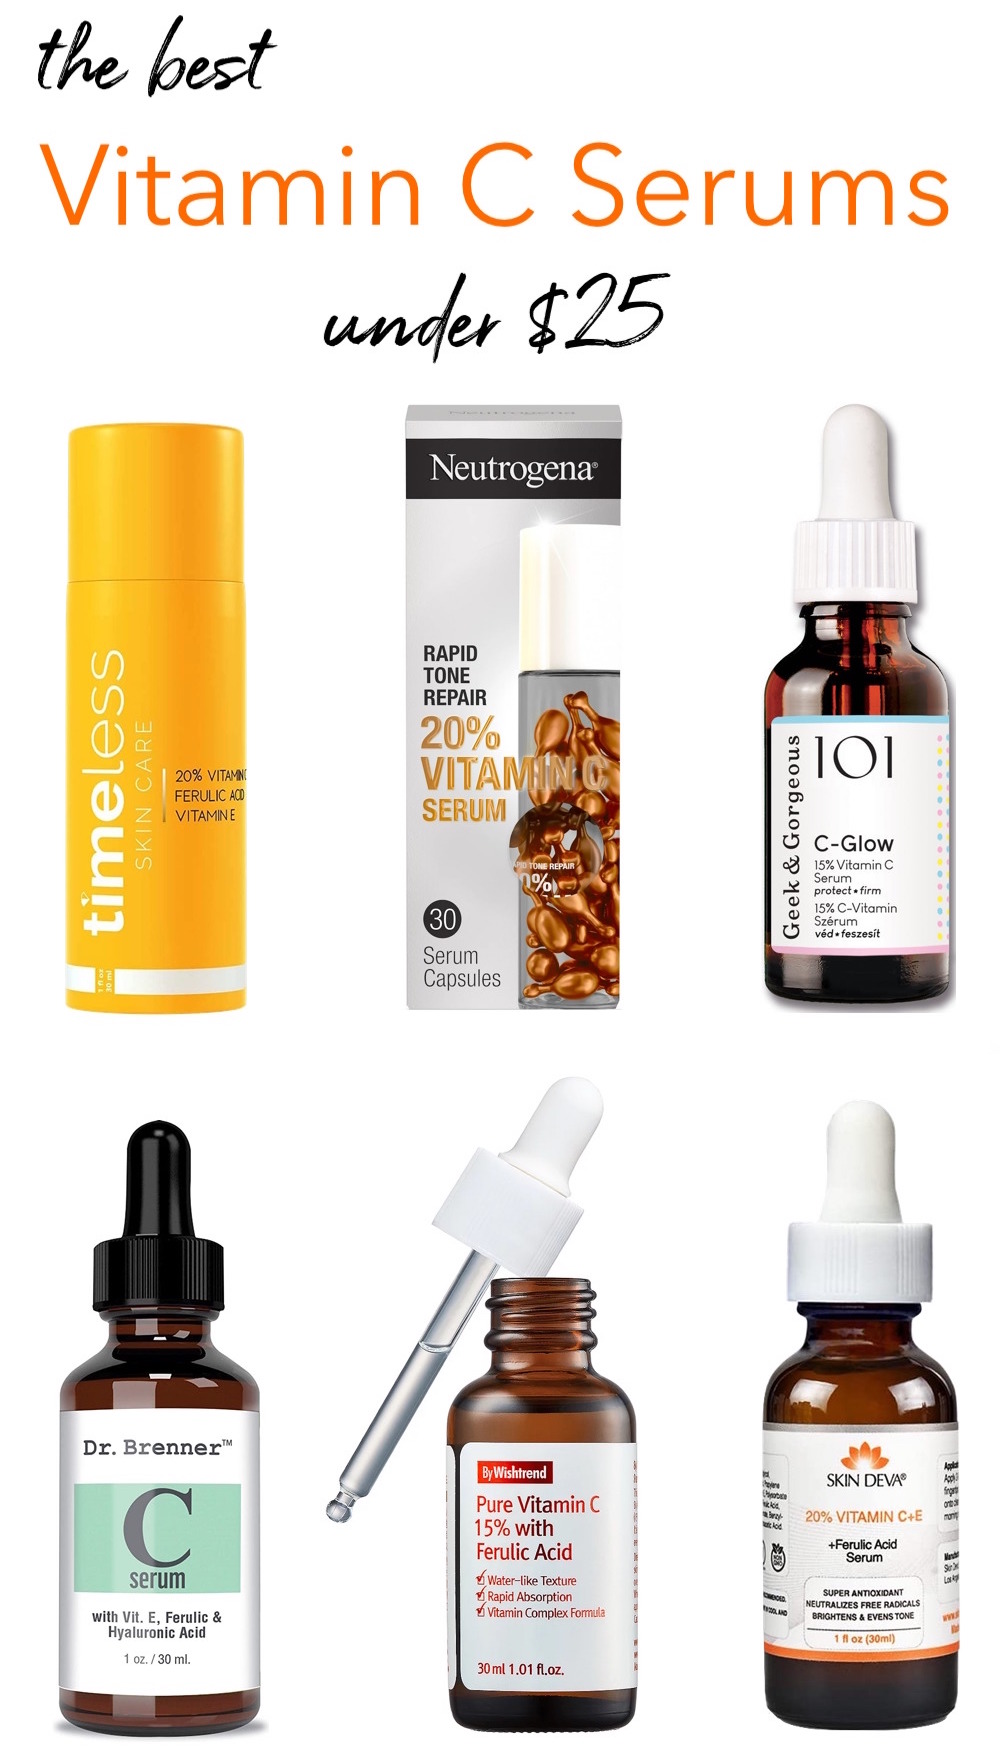 The Best Vitamin Serums $25 (Affordable & Effective!)